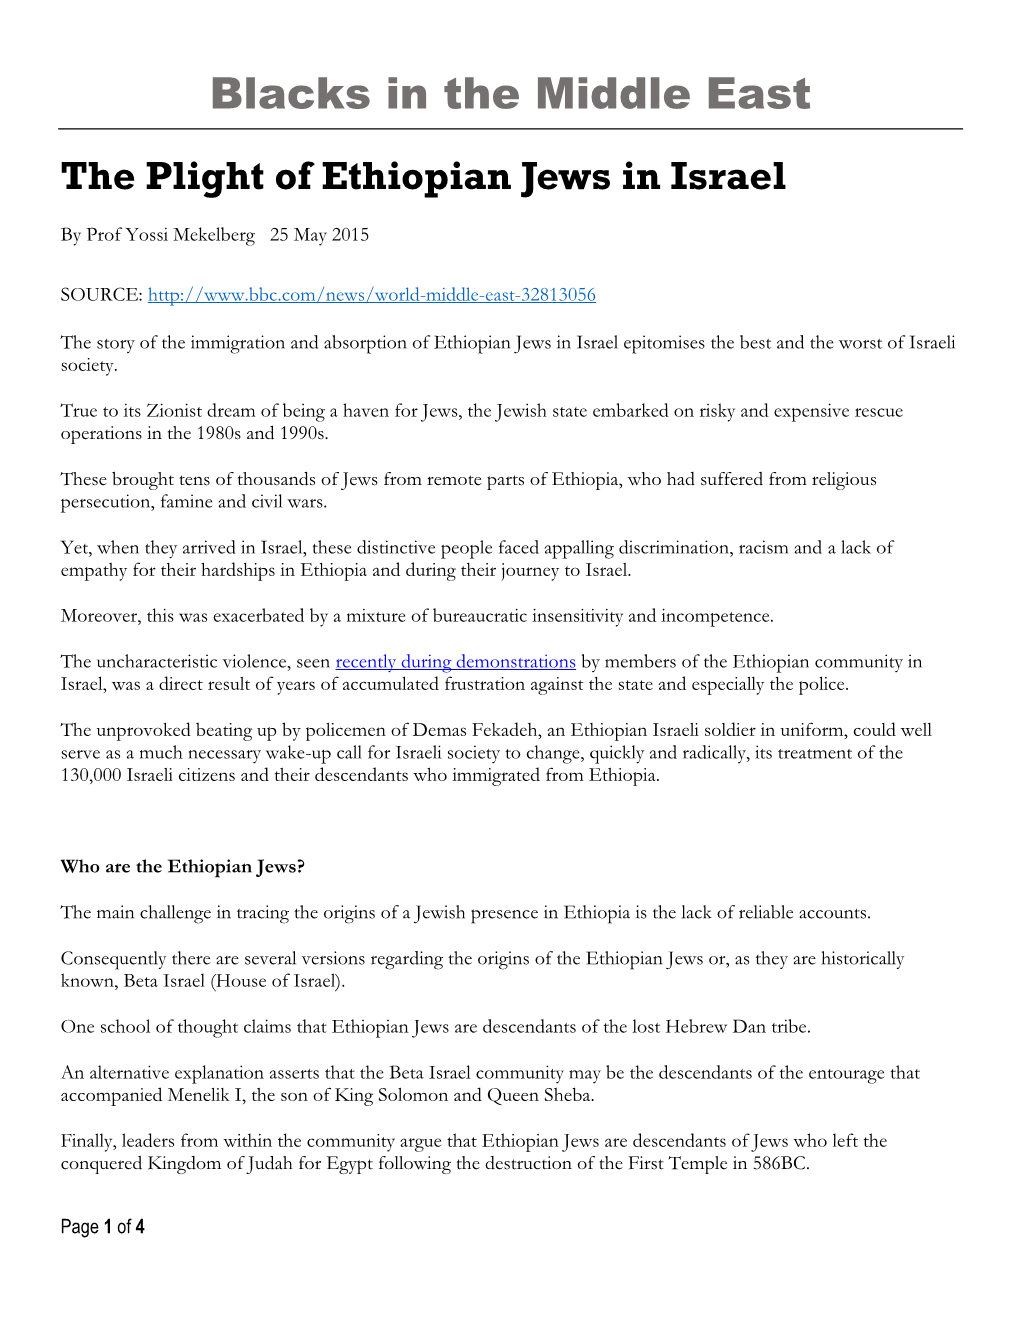 Blacks in the Middle East the Plight of Ethiopian Jews in Israel